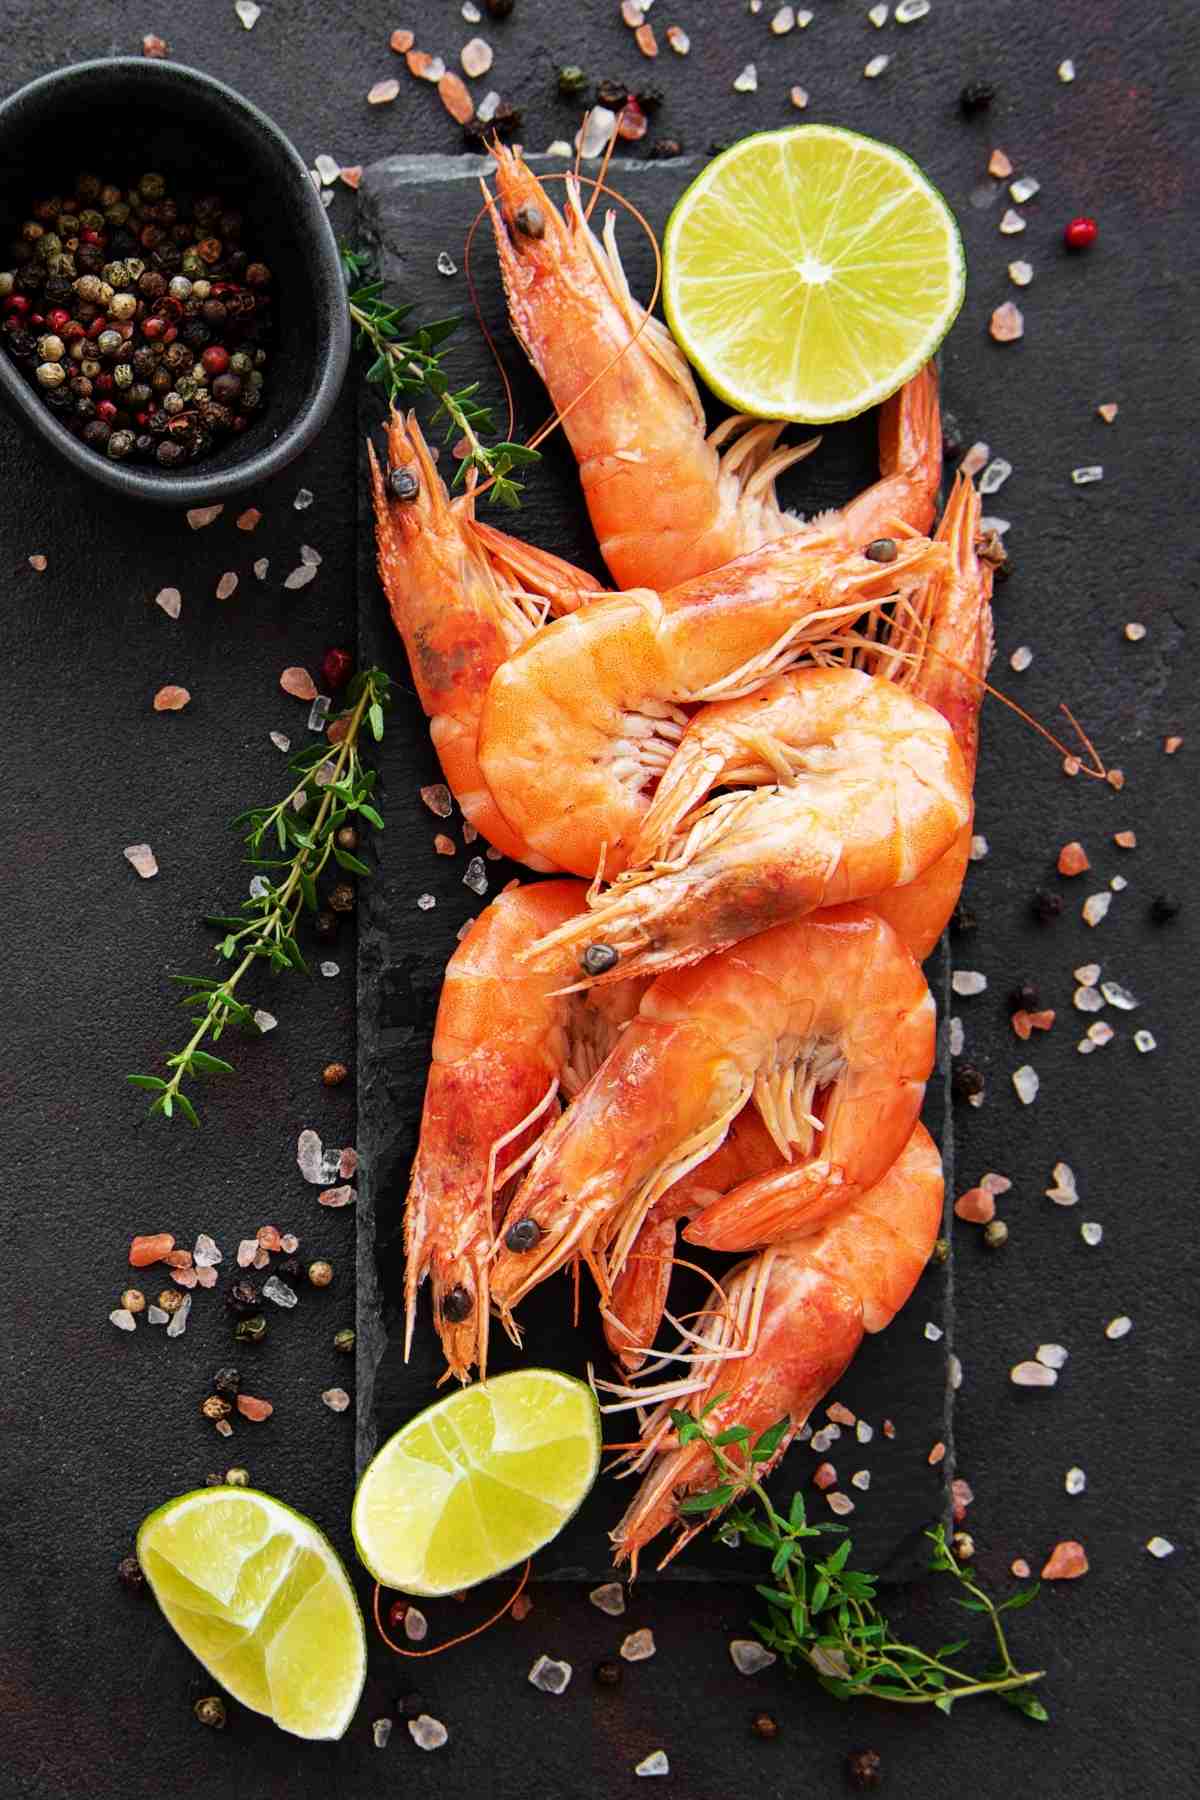 Shrimp is a versatile type of shellfish that can be enjoyed in many ways. It’s delicious in salads, stir fries, soups, and more. If you have cooked shrimp in your fridge, you want to ensure that it’s properly stored to keep it fresh. In this post, we’ll share some guidelines on how to safely store cooked shrimp in the fridge.